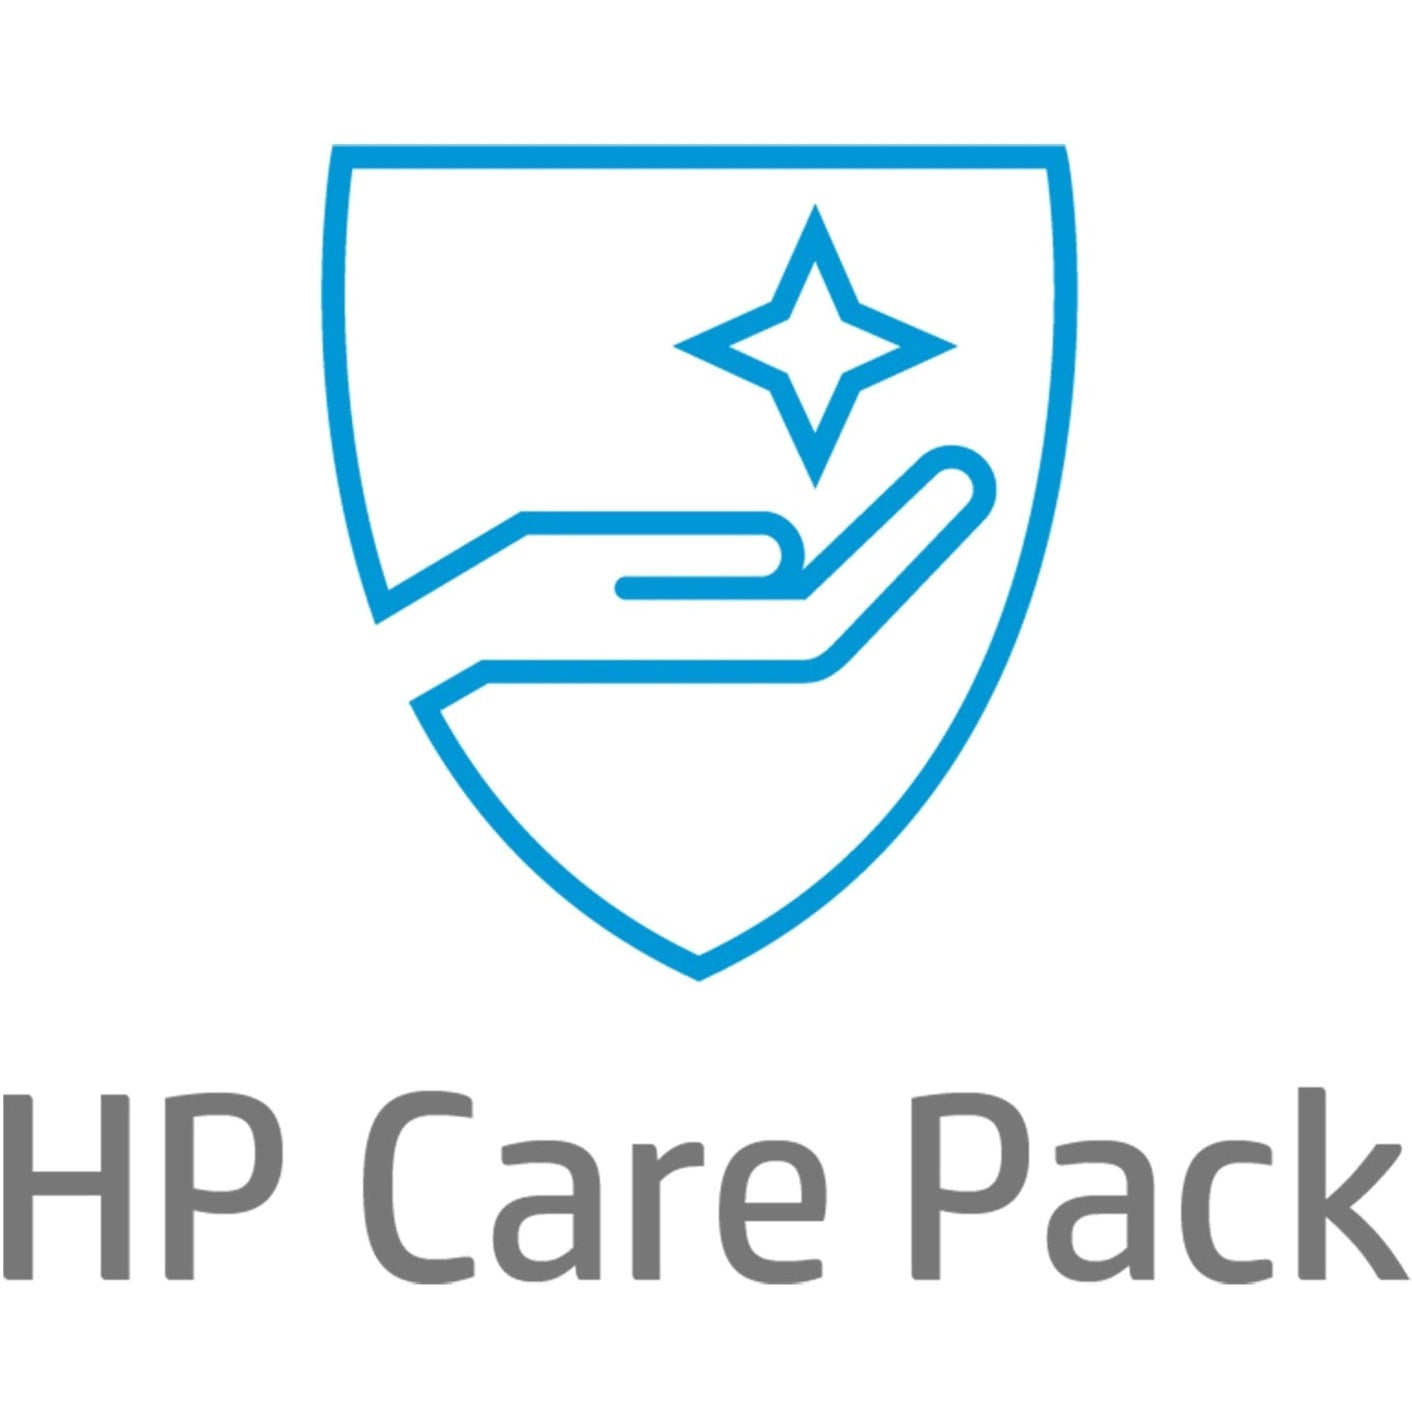 HP Care Pack - 3 Year - Warranty (UB0F3E)